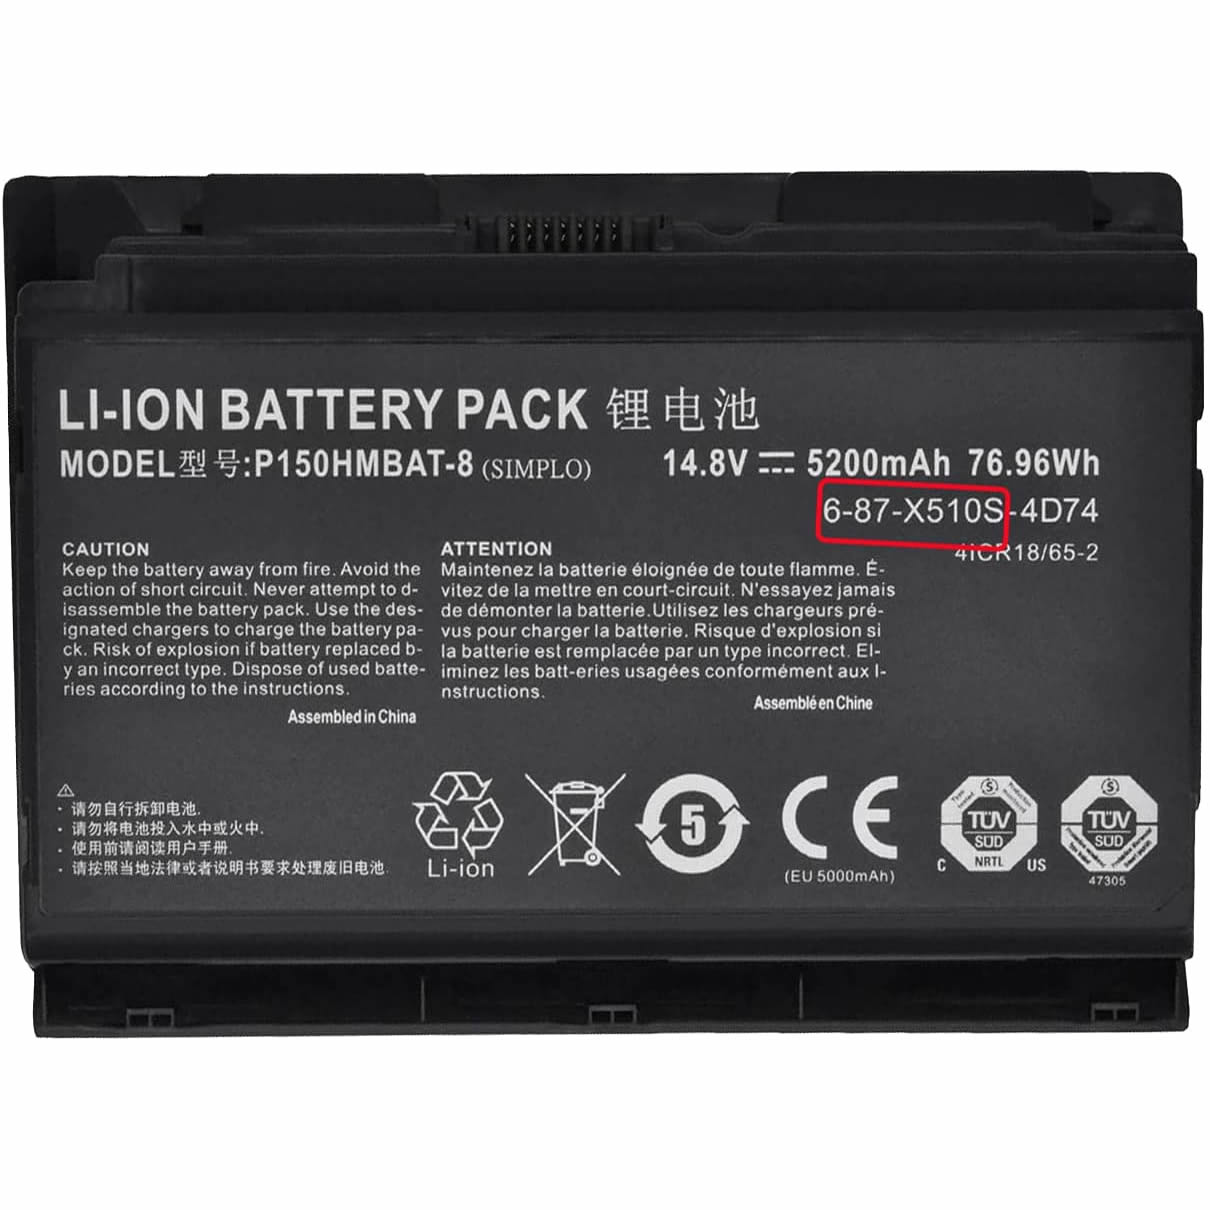 Clevo P150HMBAT-8 P150EM 6-87-X510S-4D72 PC Replace Battery 14.8V 5200mAh for Sager Np8268-s